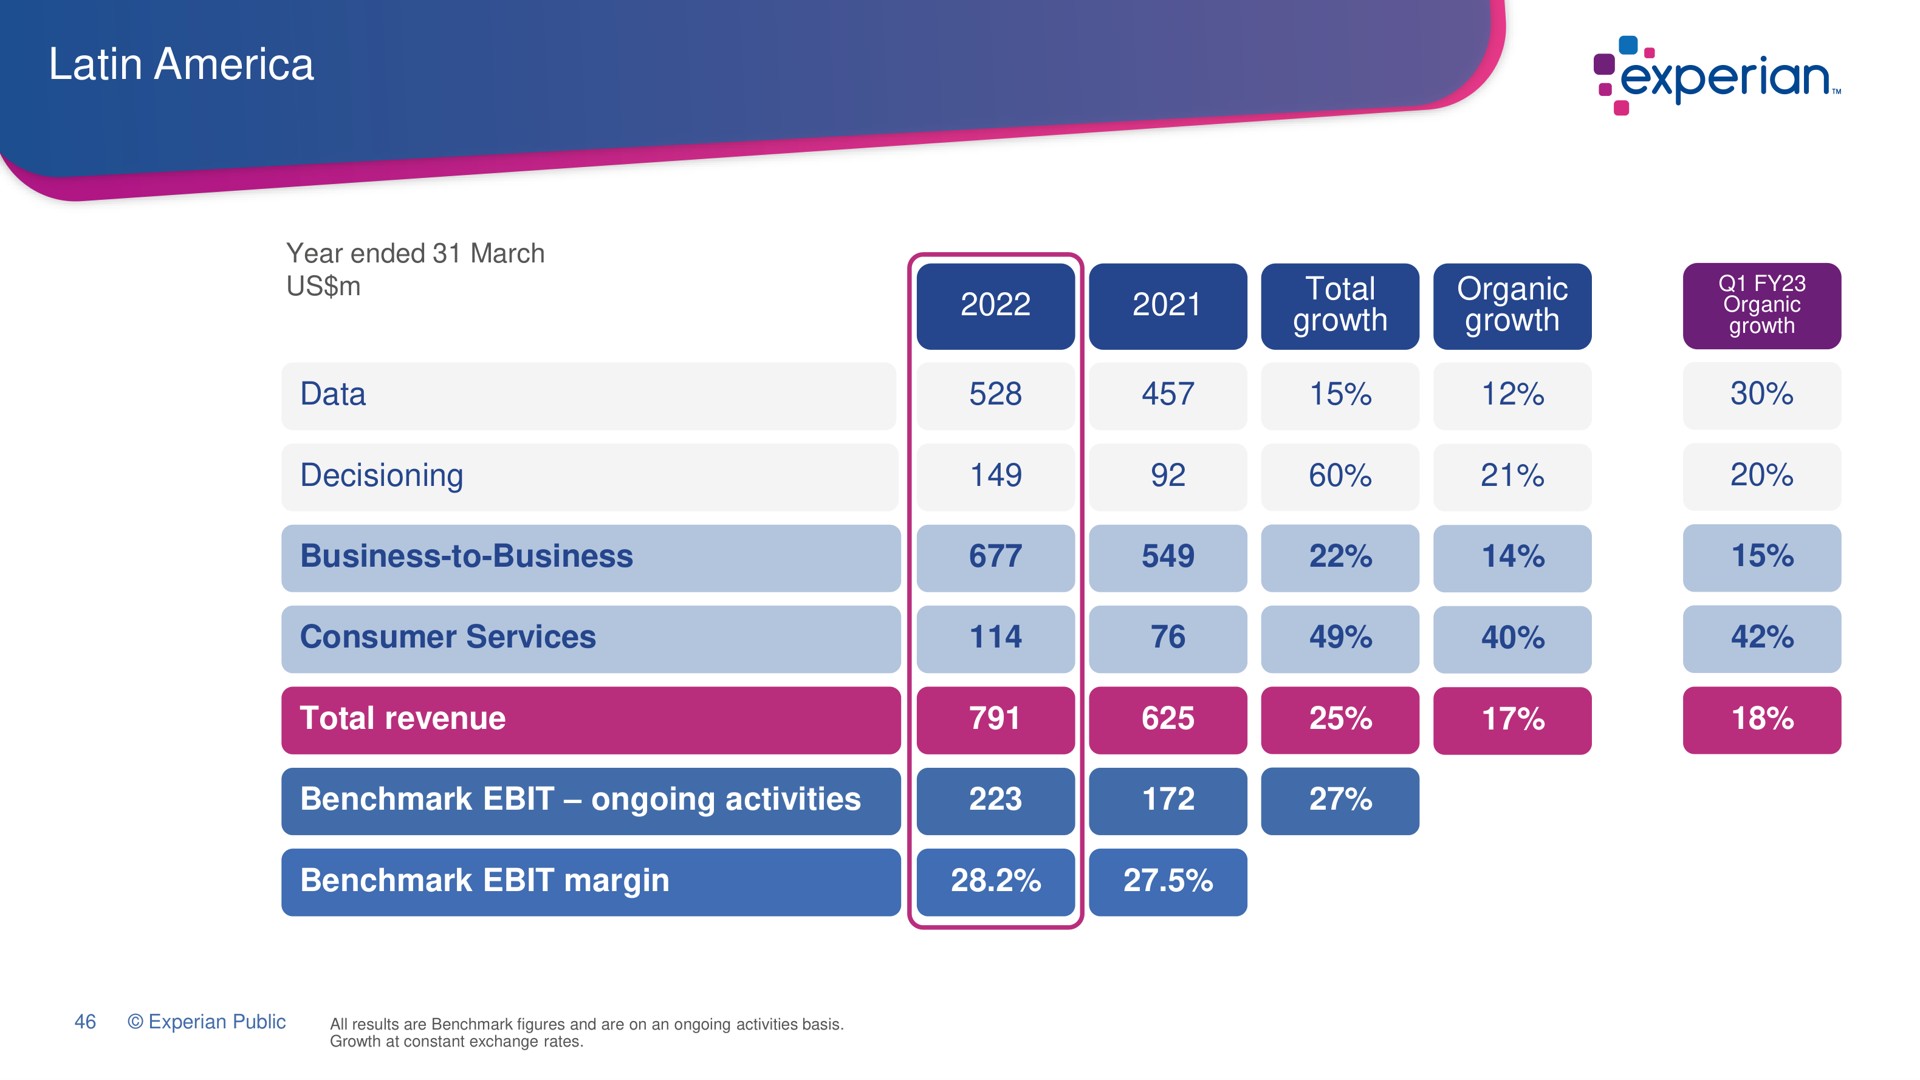 data business to business consumer services total revenue ongoing activities total growth organic growth margin | Experian